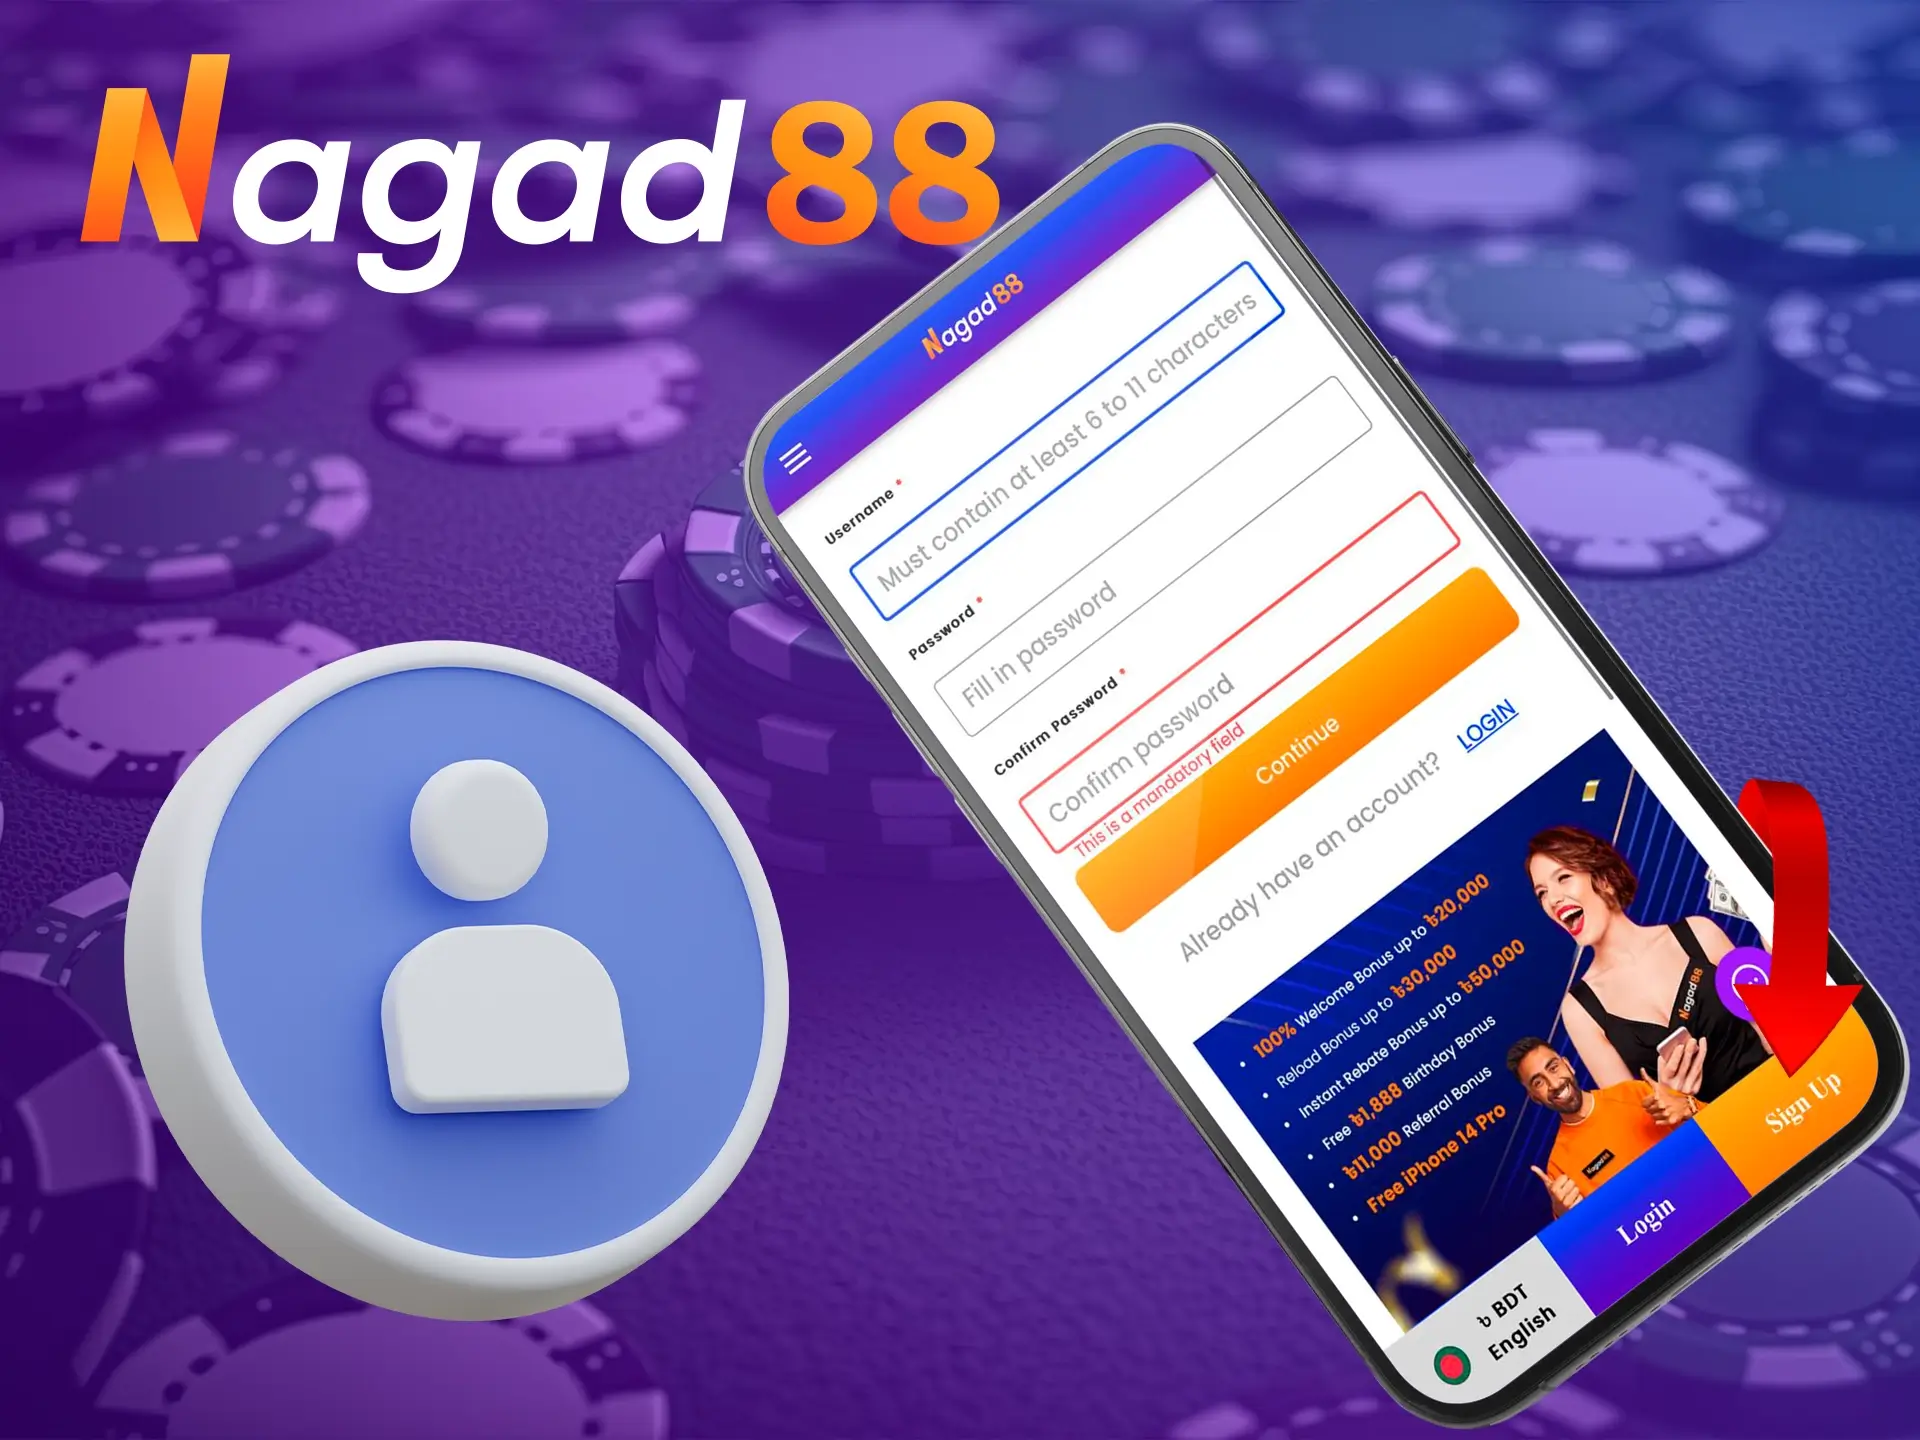 Enter your details carefully and complete your registration in the Nagad88 app.